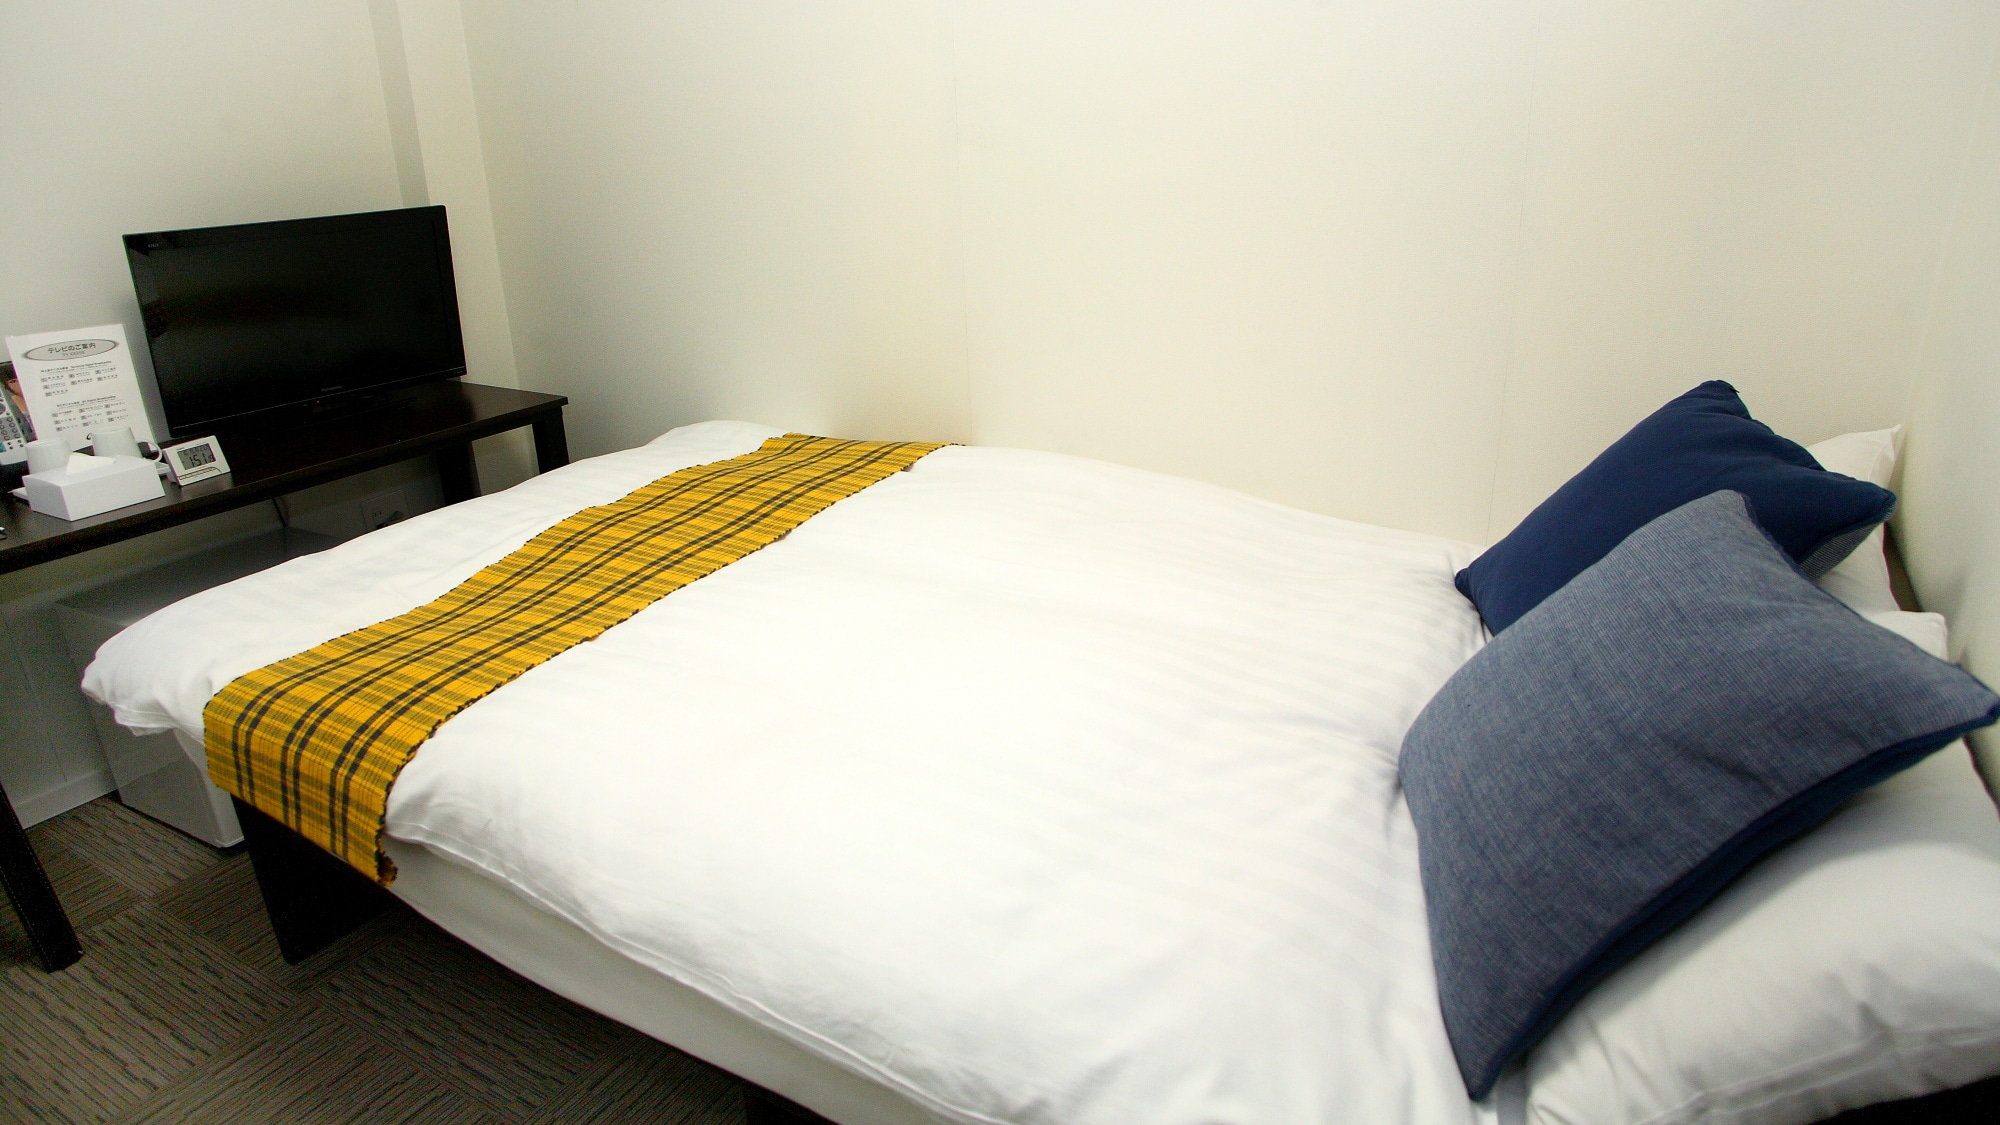 Semi-double room: 12 square meters, bed width 120 cm, individual air conditioning, Wi-Fi